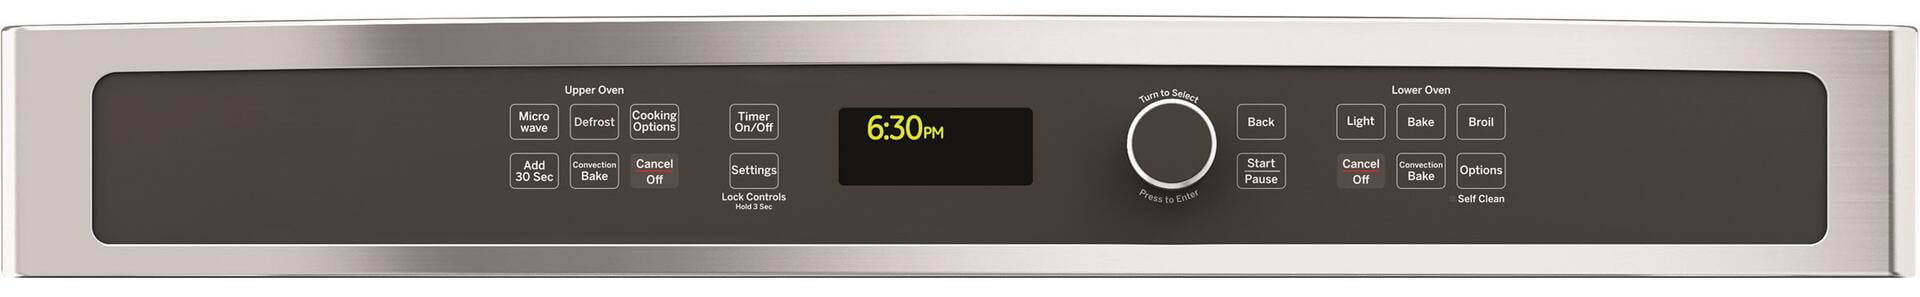 GE Profile™ 30 Built-In Combination Convection Microwave